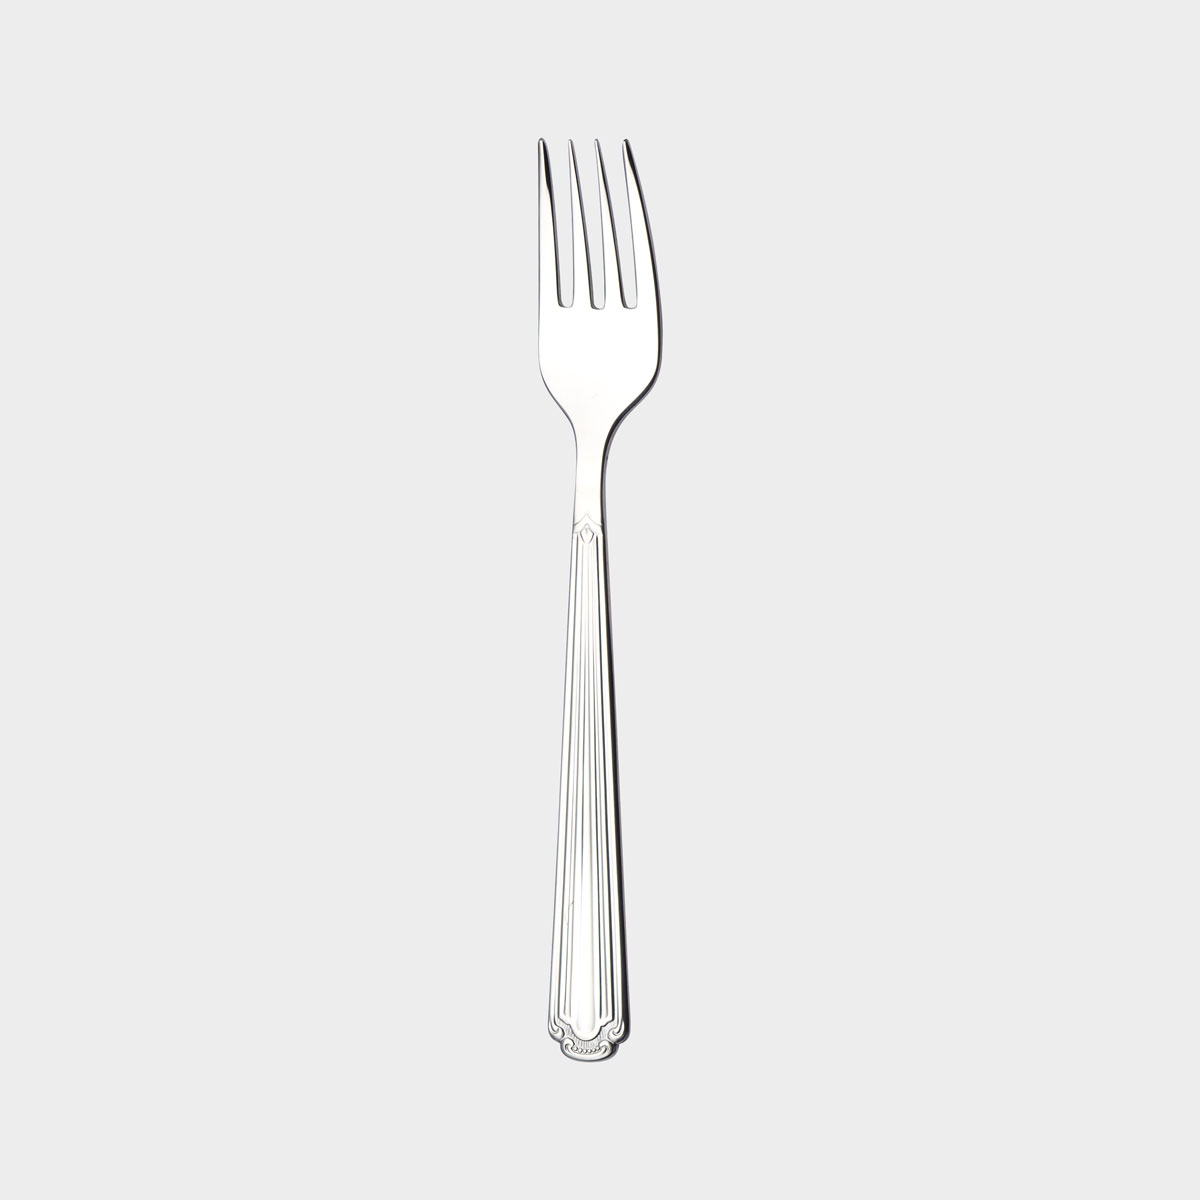 Renessanse appetizer fork product image